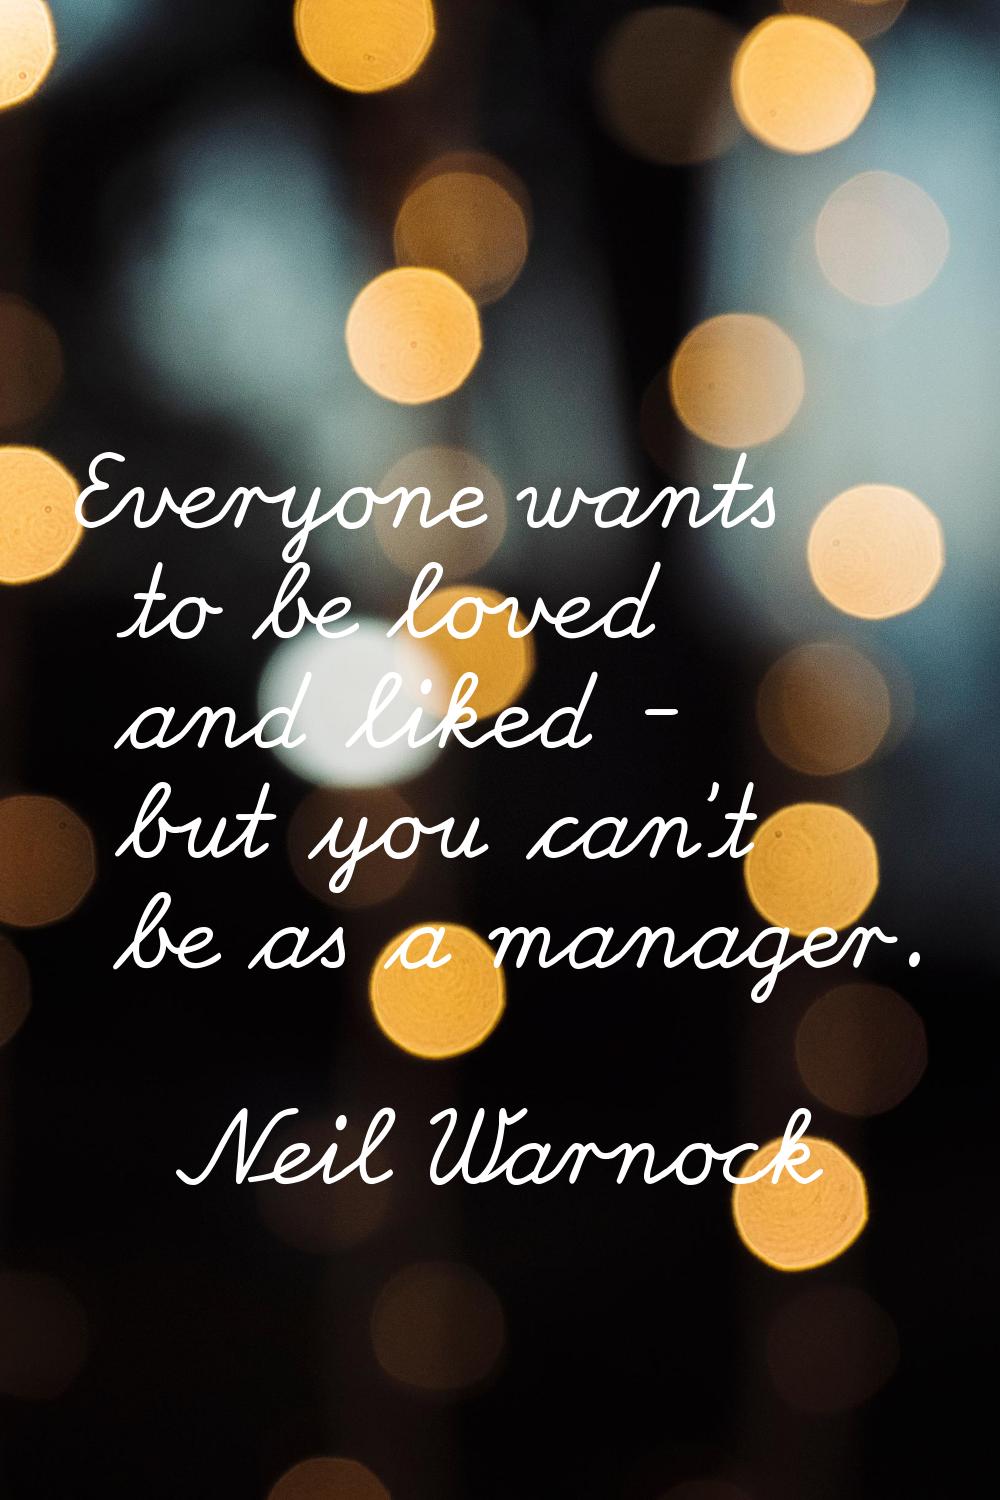 Everyone wants to be loved and liked - but you can't be as a manager.